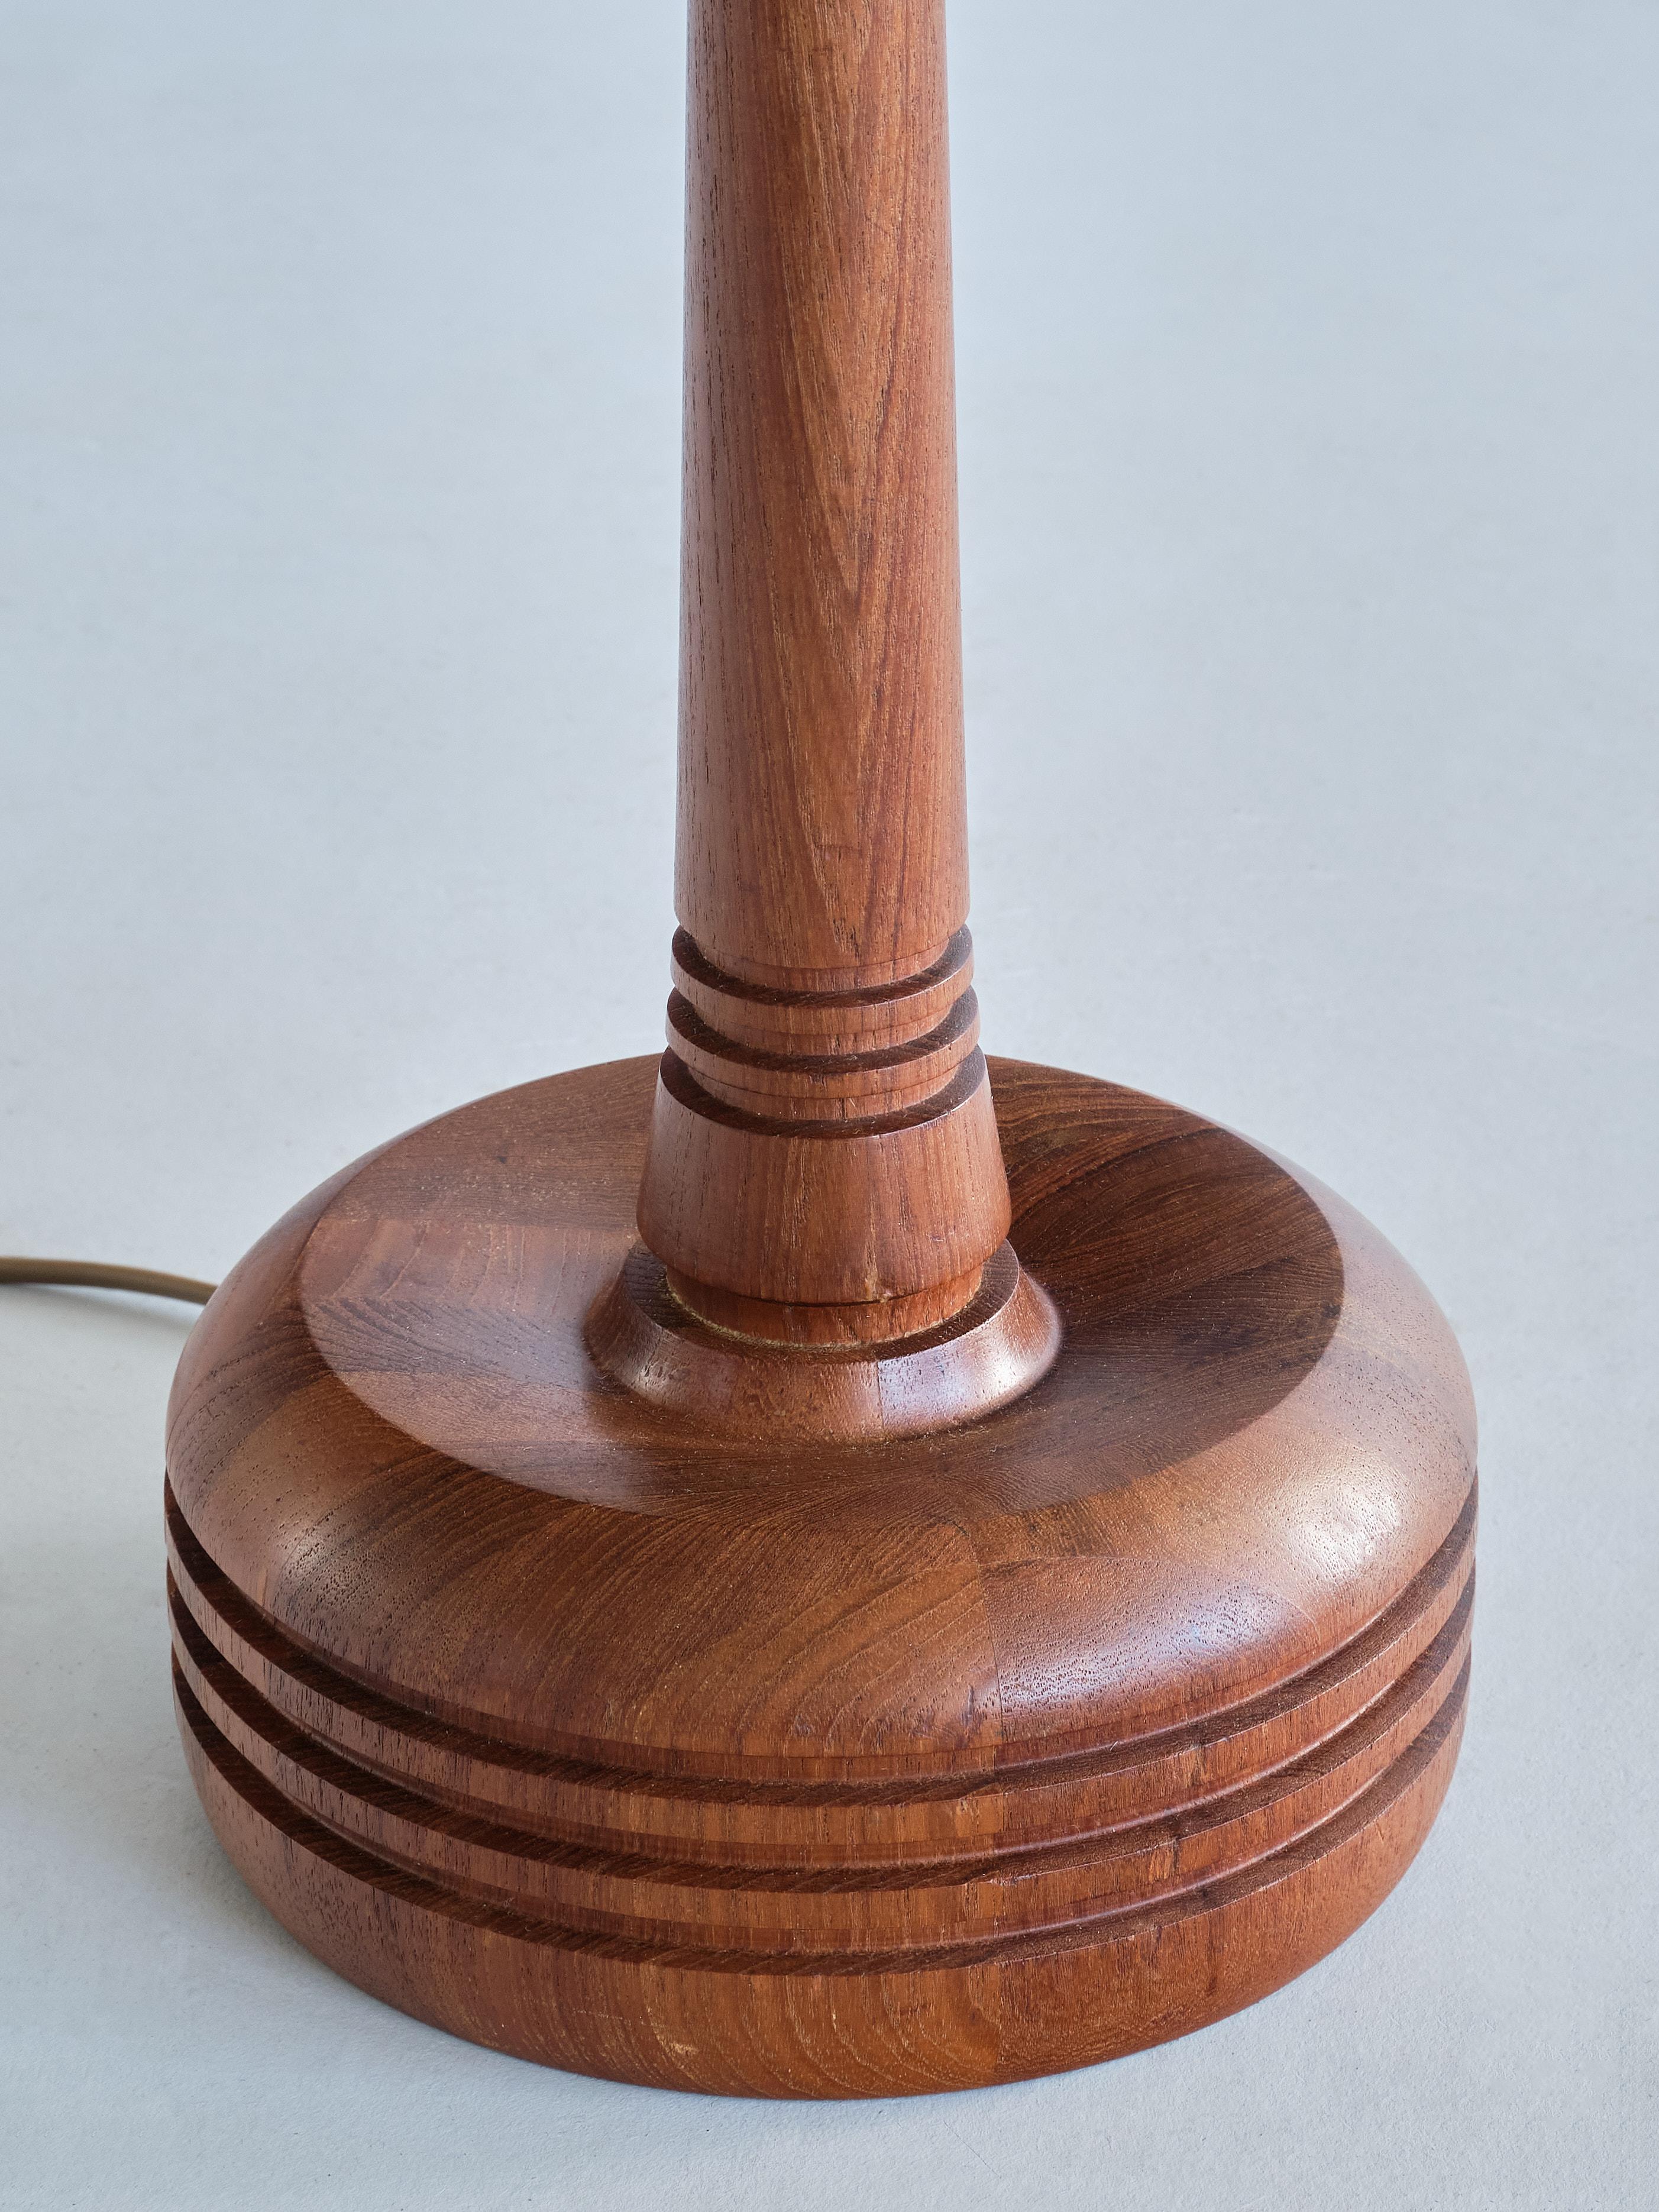 Tall Stilarmatur Tranås Table Lamp in Teak Wood with Cone Shade, Sweden, 1960s For Sale 3